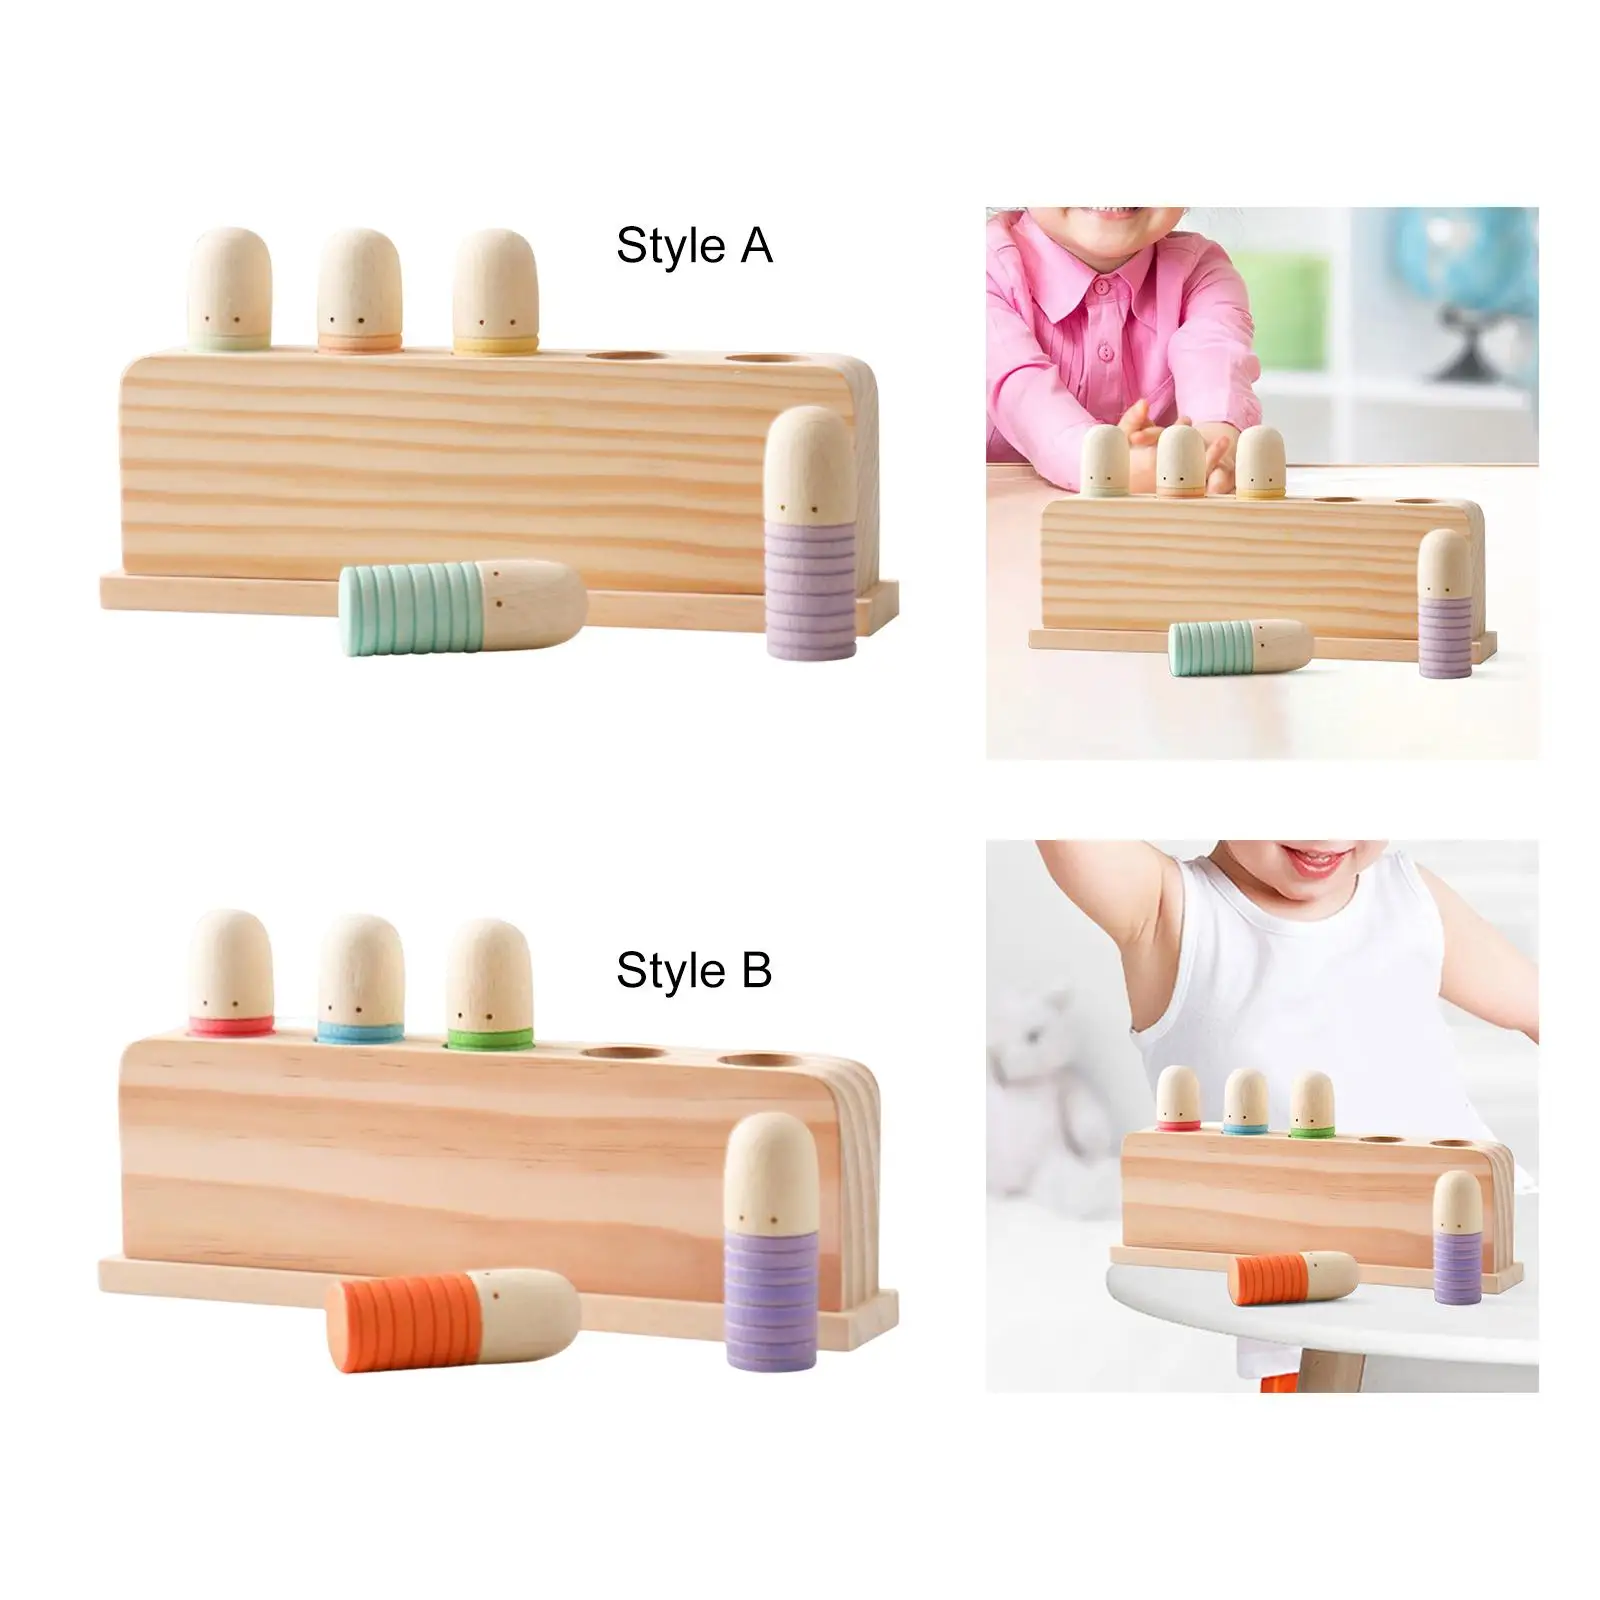 Toddlers Pretend Play People Figures Bounce Game Wooden Rainbow Peg Dolls Shapes Sorting Toys for Kids Girls Boys Toddler Gifts